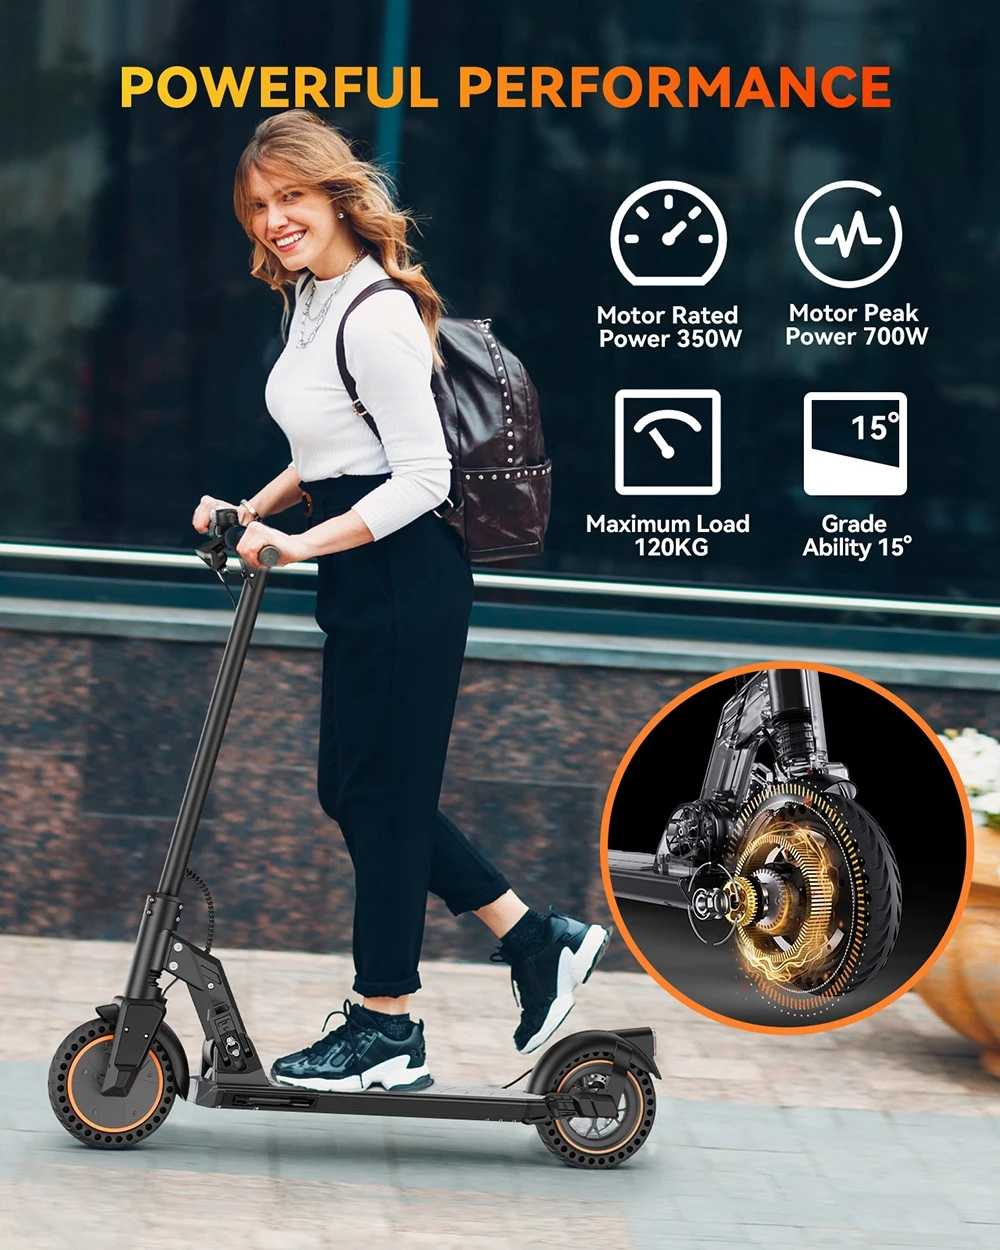 5TH WHEEL M2 Electric Scooter 8.5'' Honeycomb 350W Motor 7.5Ah Battery for 30km Range, 25km/h Max Speed